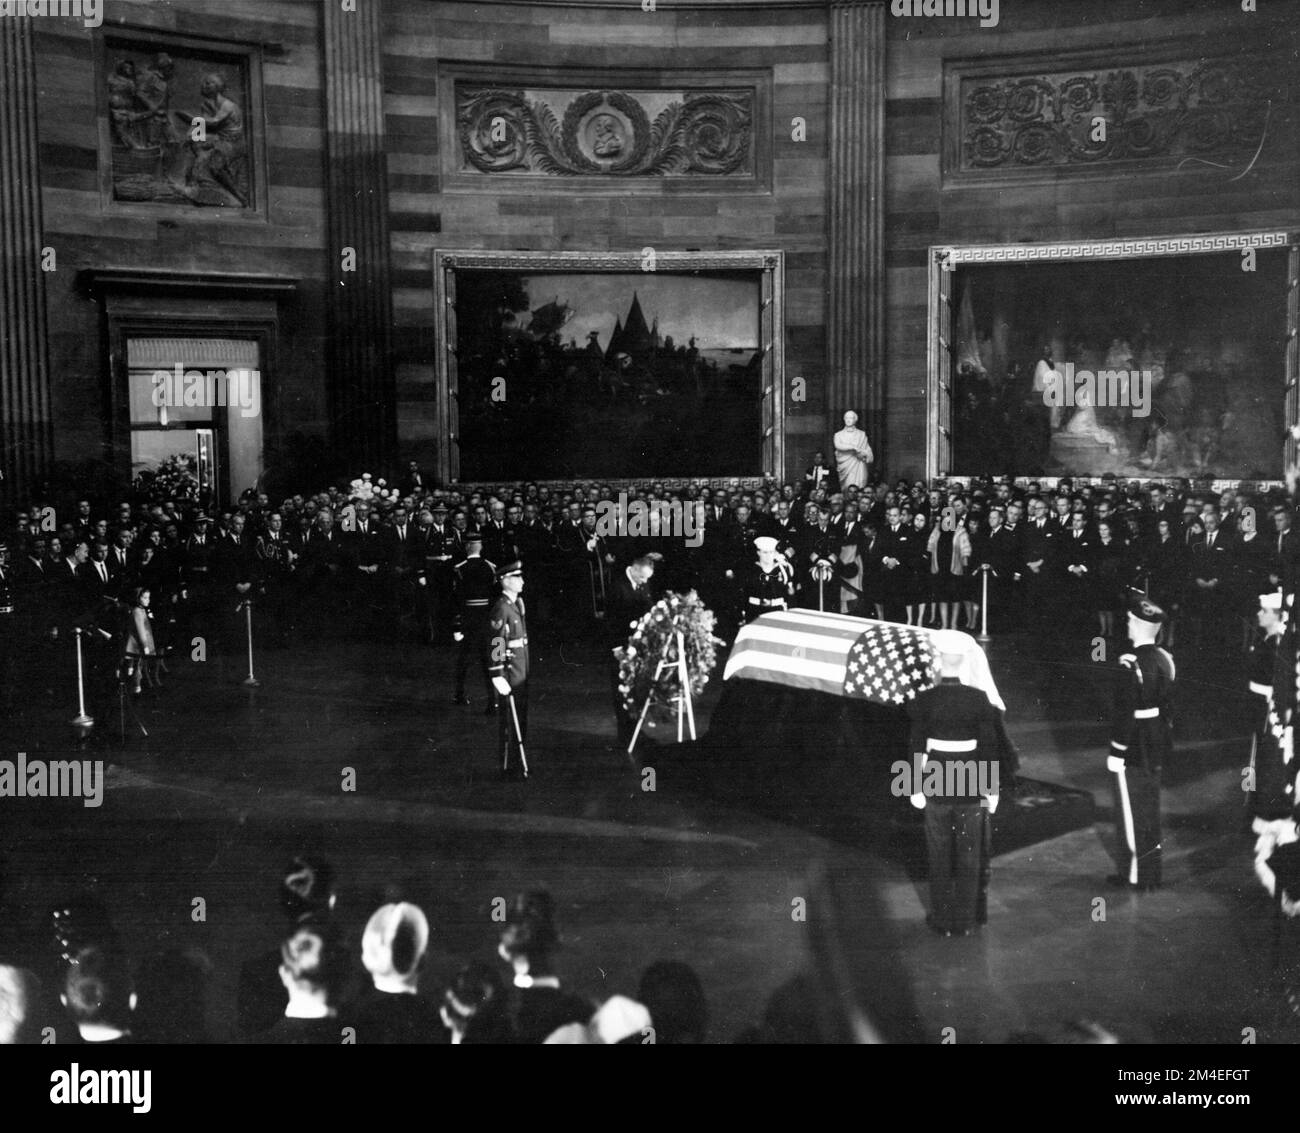 President Lyndon B. Johnson placing a wreath before the flag-draped casket of President Kennedy, during funeral services held in the United States Capitol Rotunda, November 24, 1963. Stock Photo